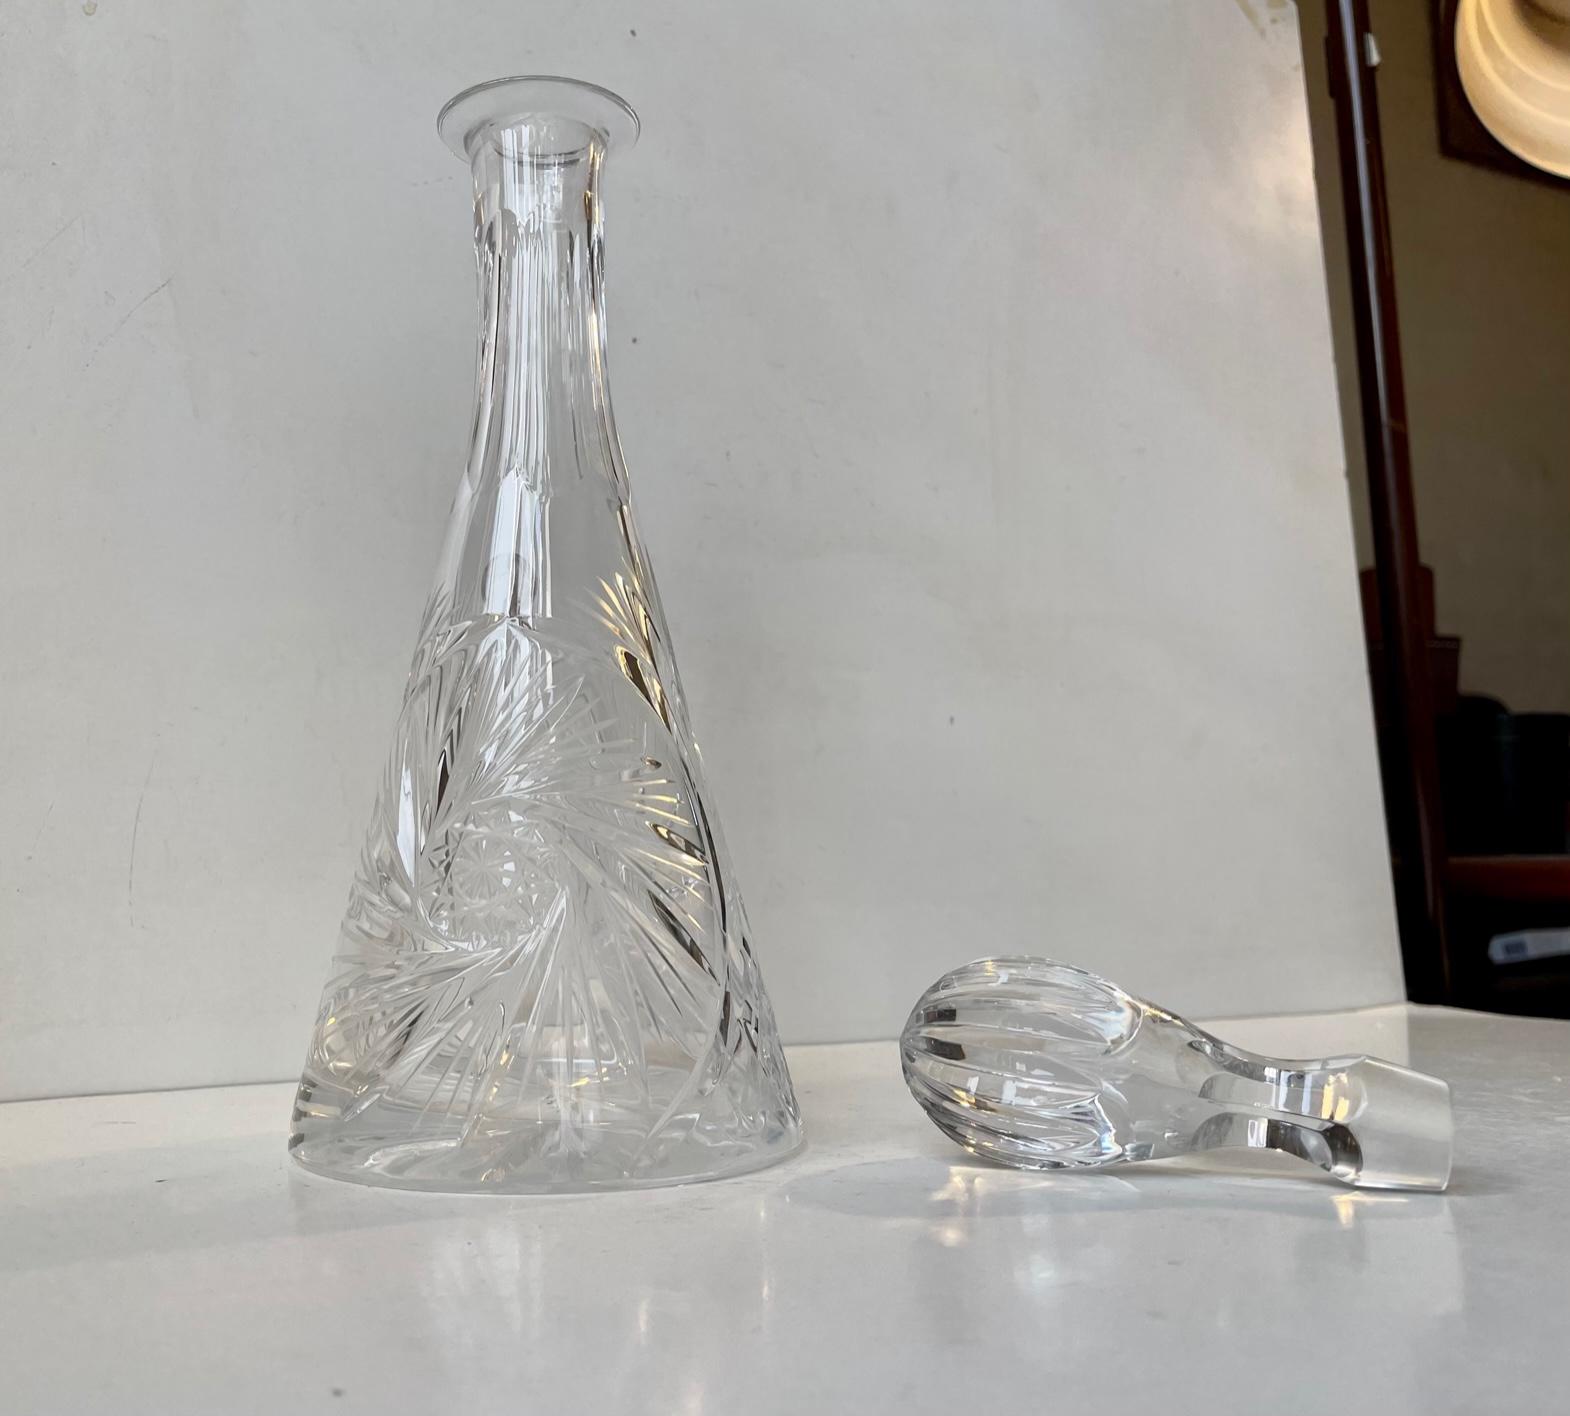 Decorative lead crystal (24%) decanter with fluted spherical stopper. Technique: hand-blown and cut. Made in Bohemia/Czech Republic during the 1960s. It has a capacity of minimum 0.7 liters. Height: 35 cm, D: 12.5 cm.